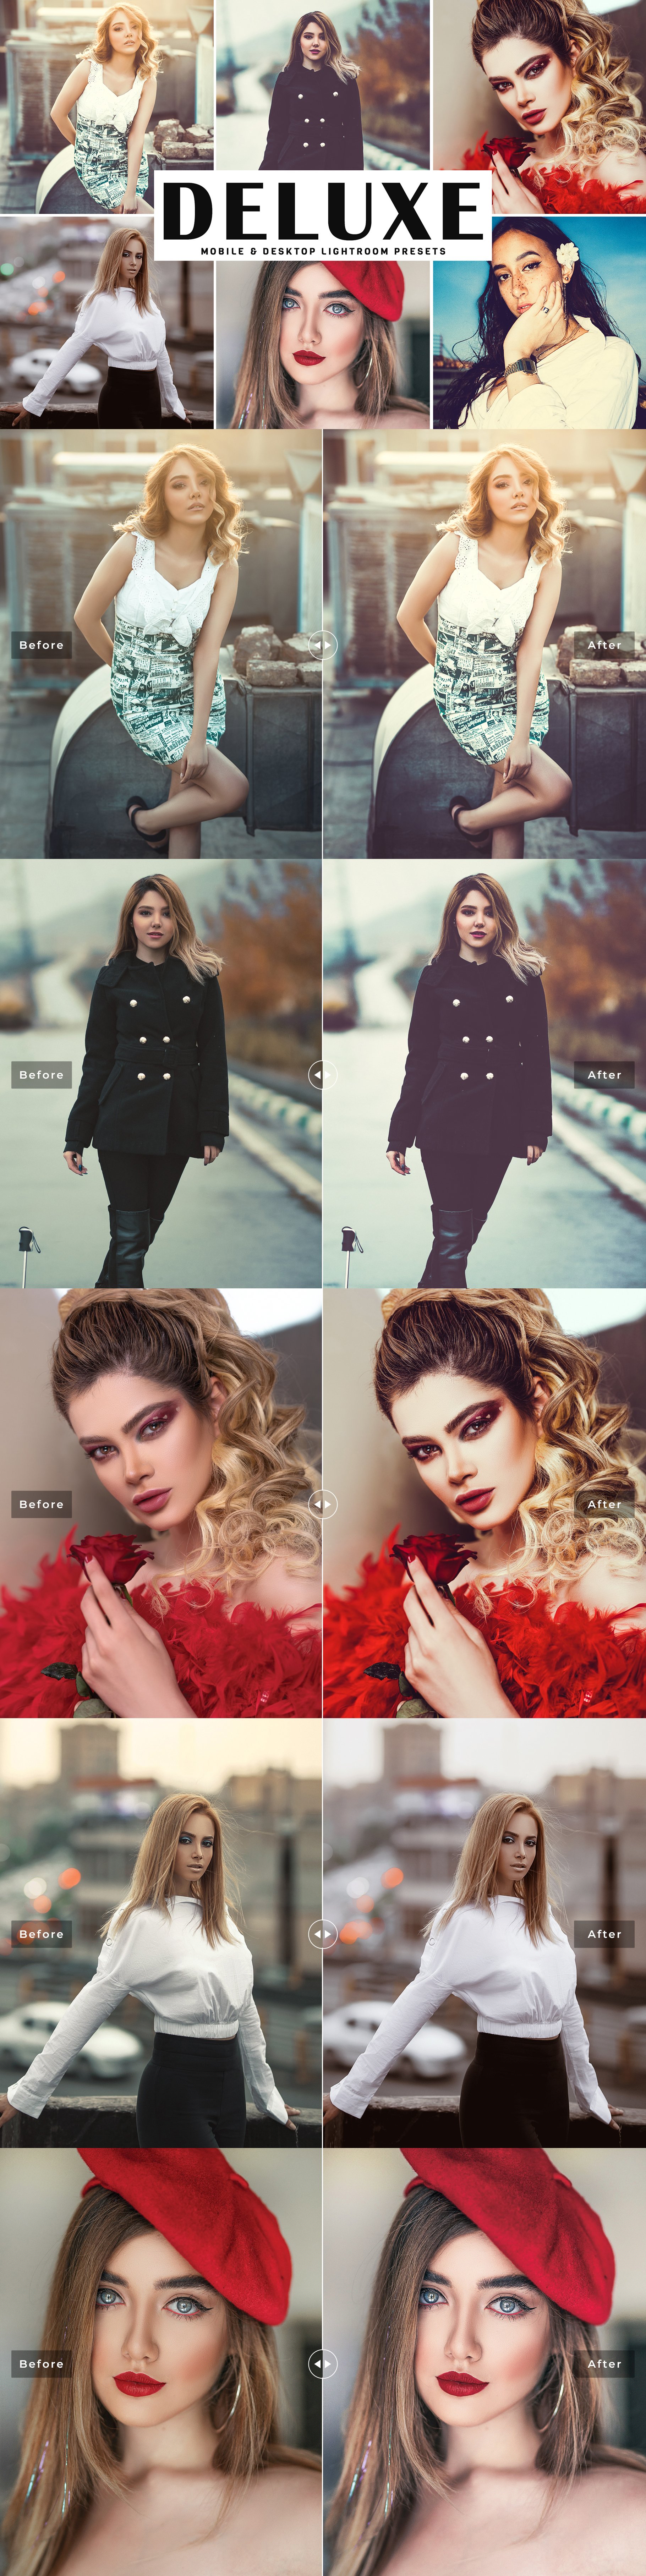 Deluxe Lightroom Presets Packcover image.